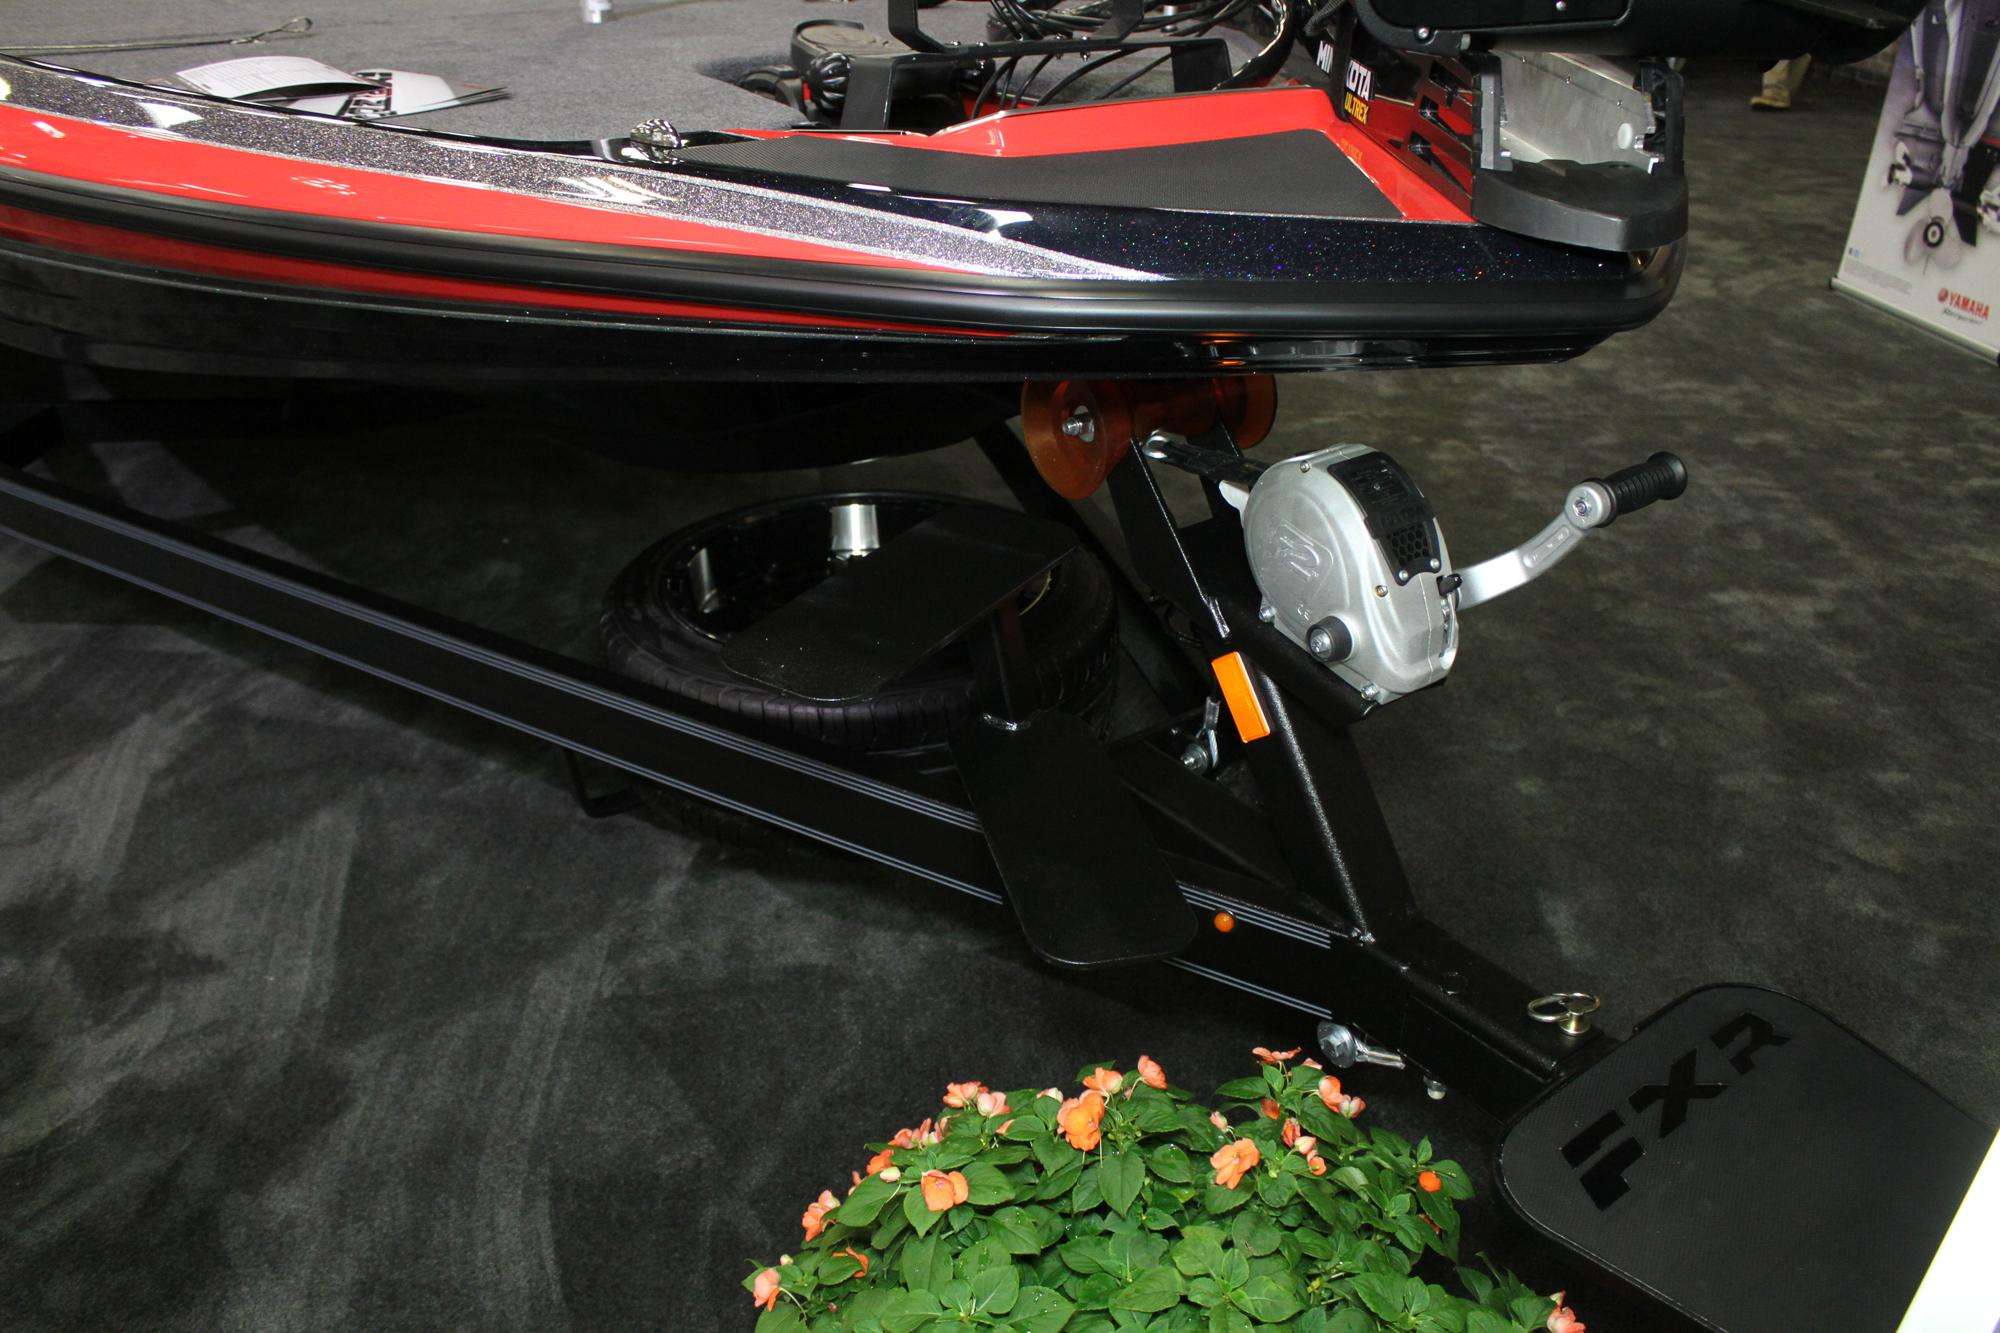 The popular step system on the Skeeter Built trailer with a Fulton Winch and the spare tire mount under the bow.